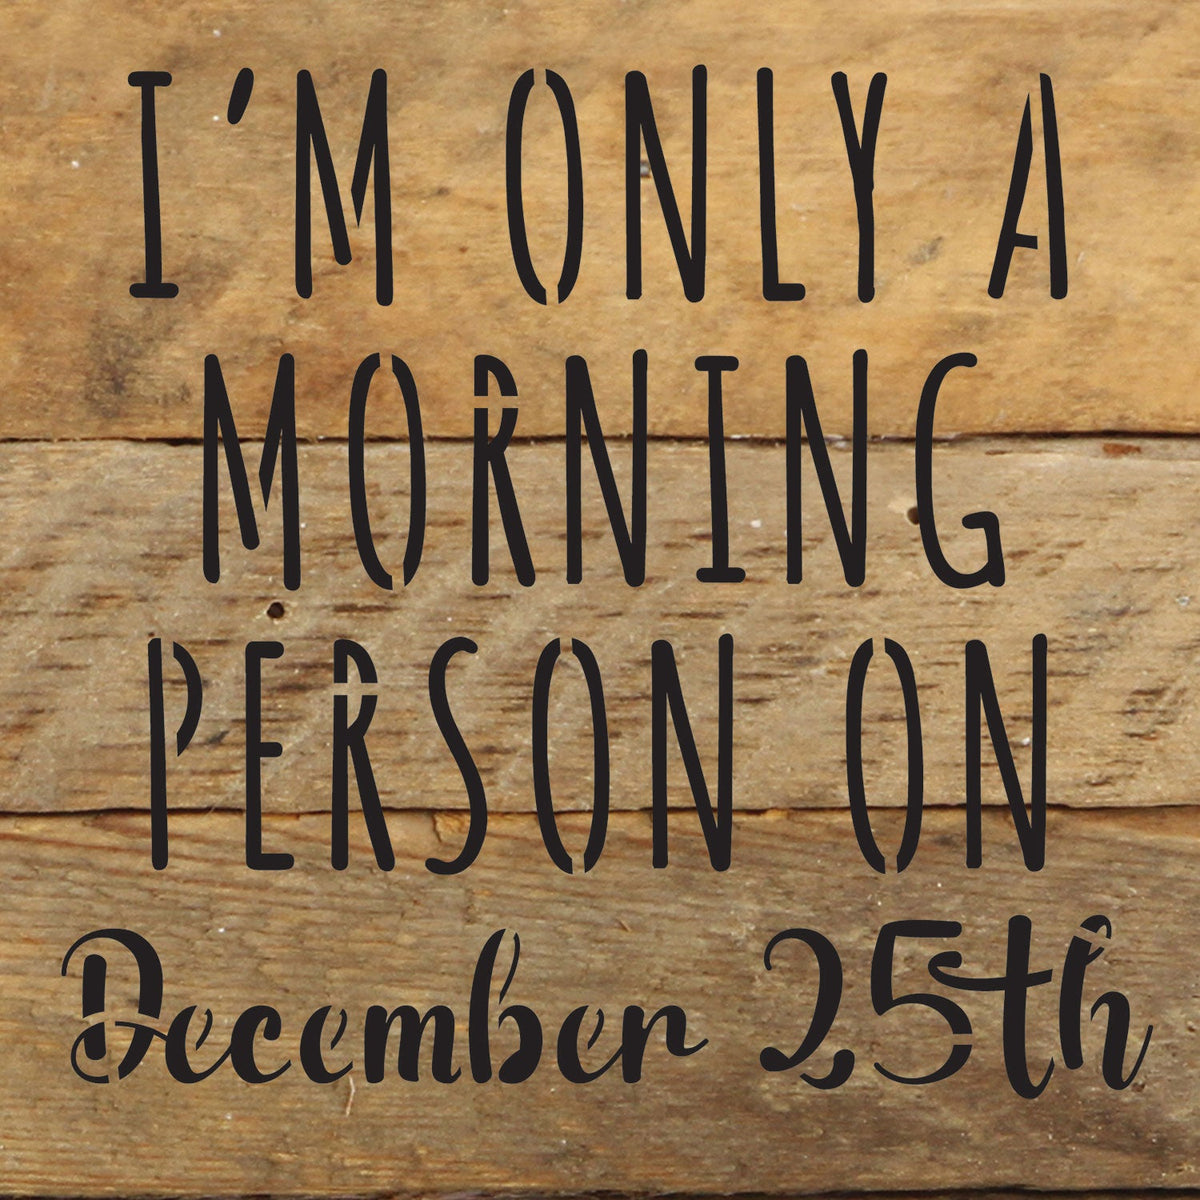 I am only a morning person on December 25th / 6x6 Reclaimed Wood Wall Decor Sign